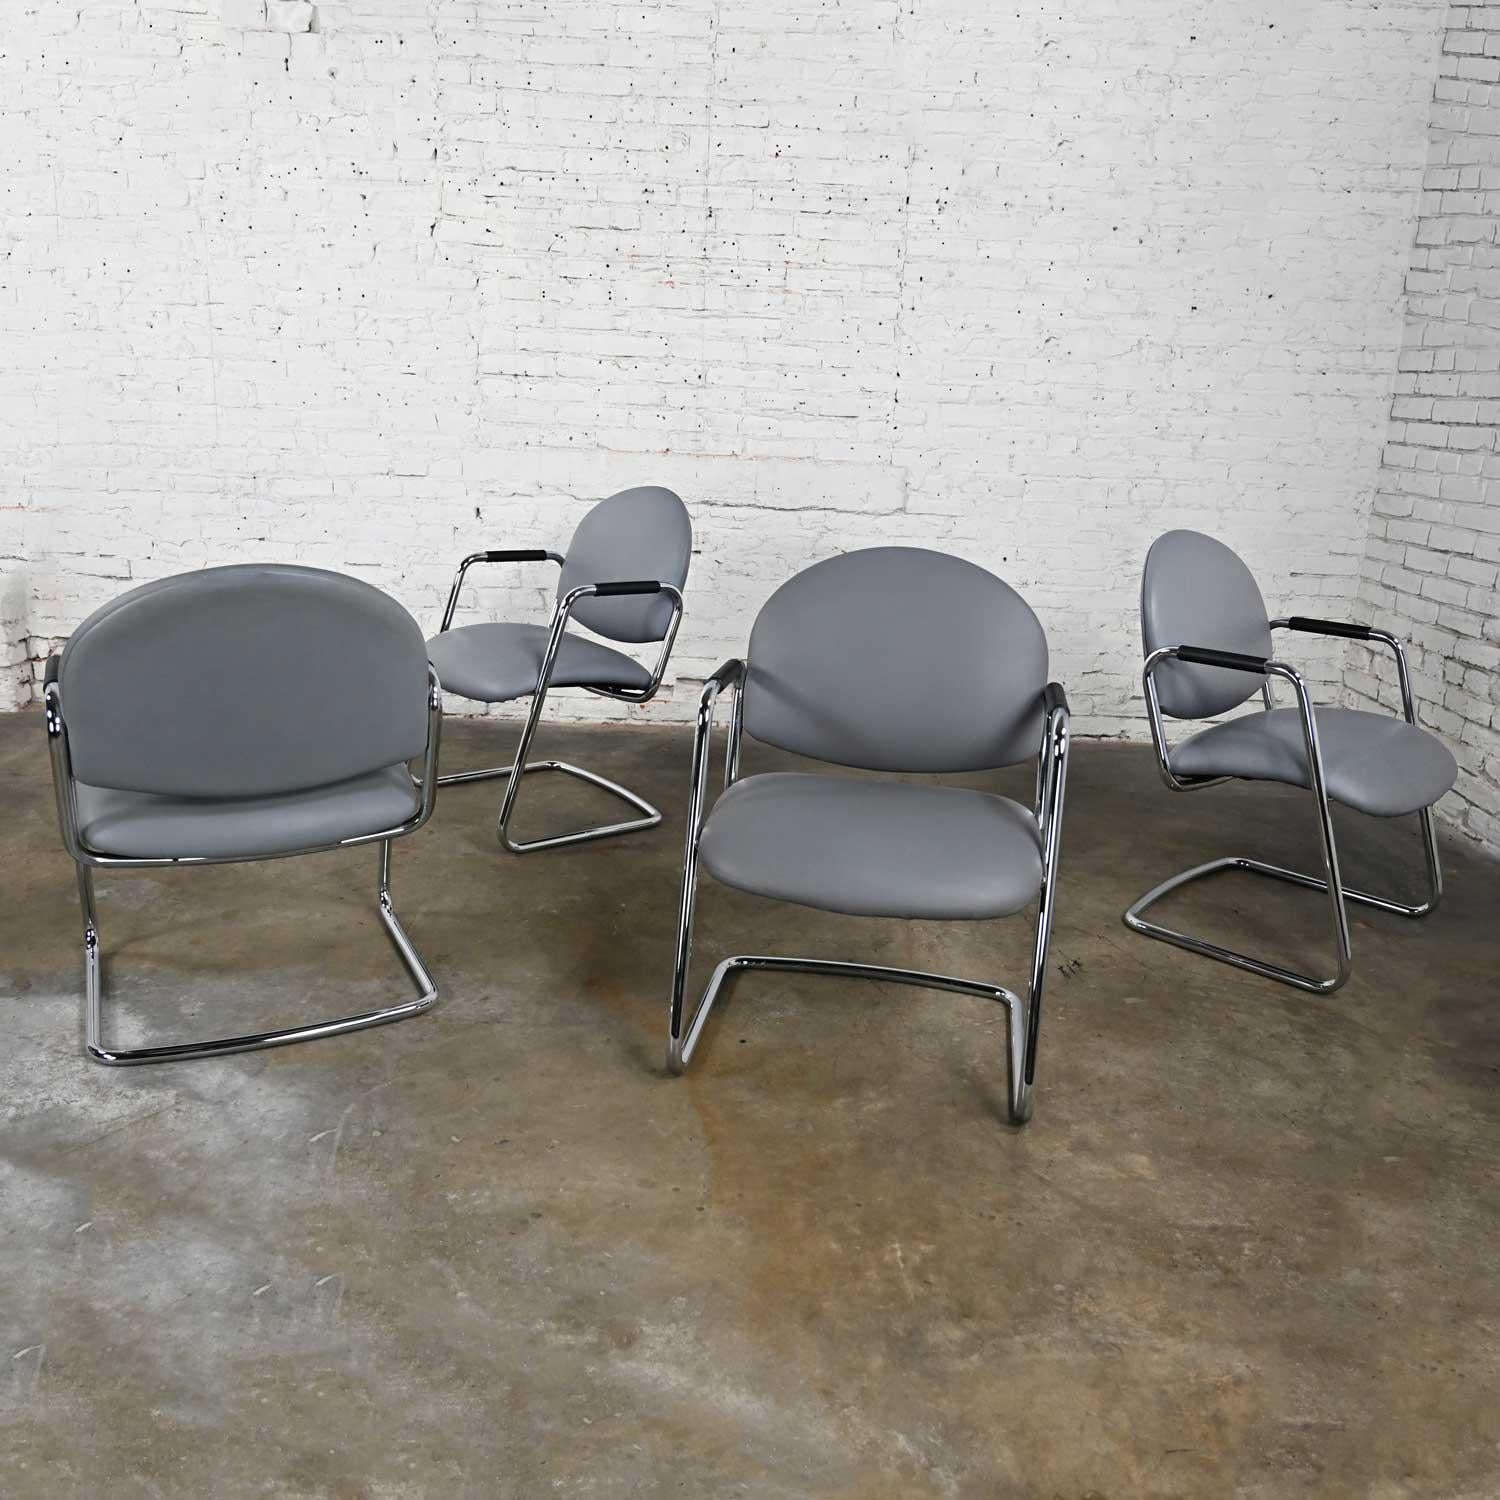 20th Century Modern Steelcase Chrome Tube Cantilever Base & Gray Faux Leather Chairs set of 4 For Sale